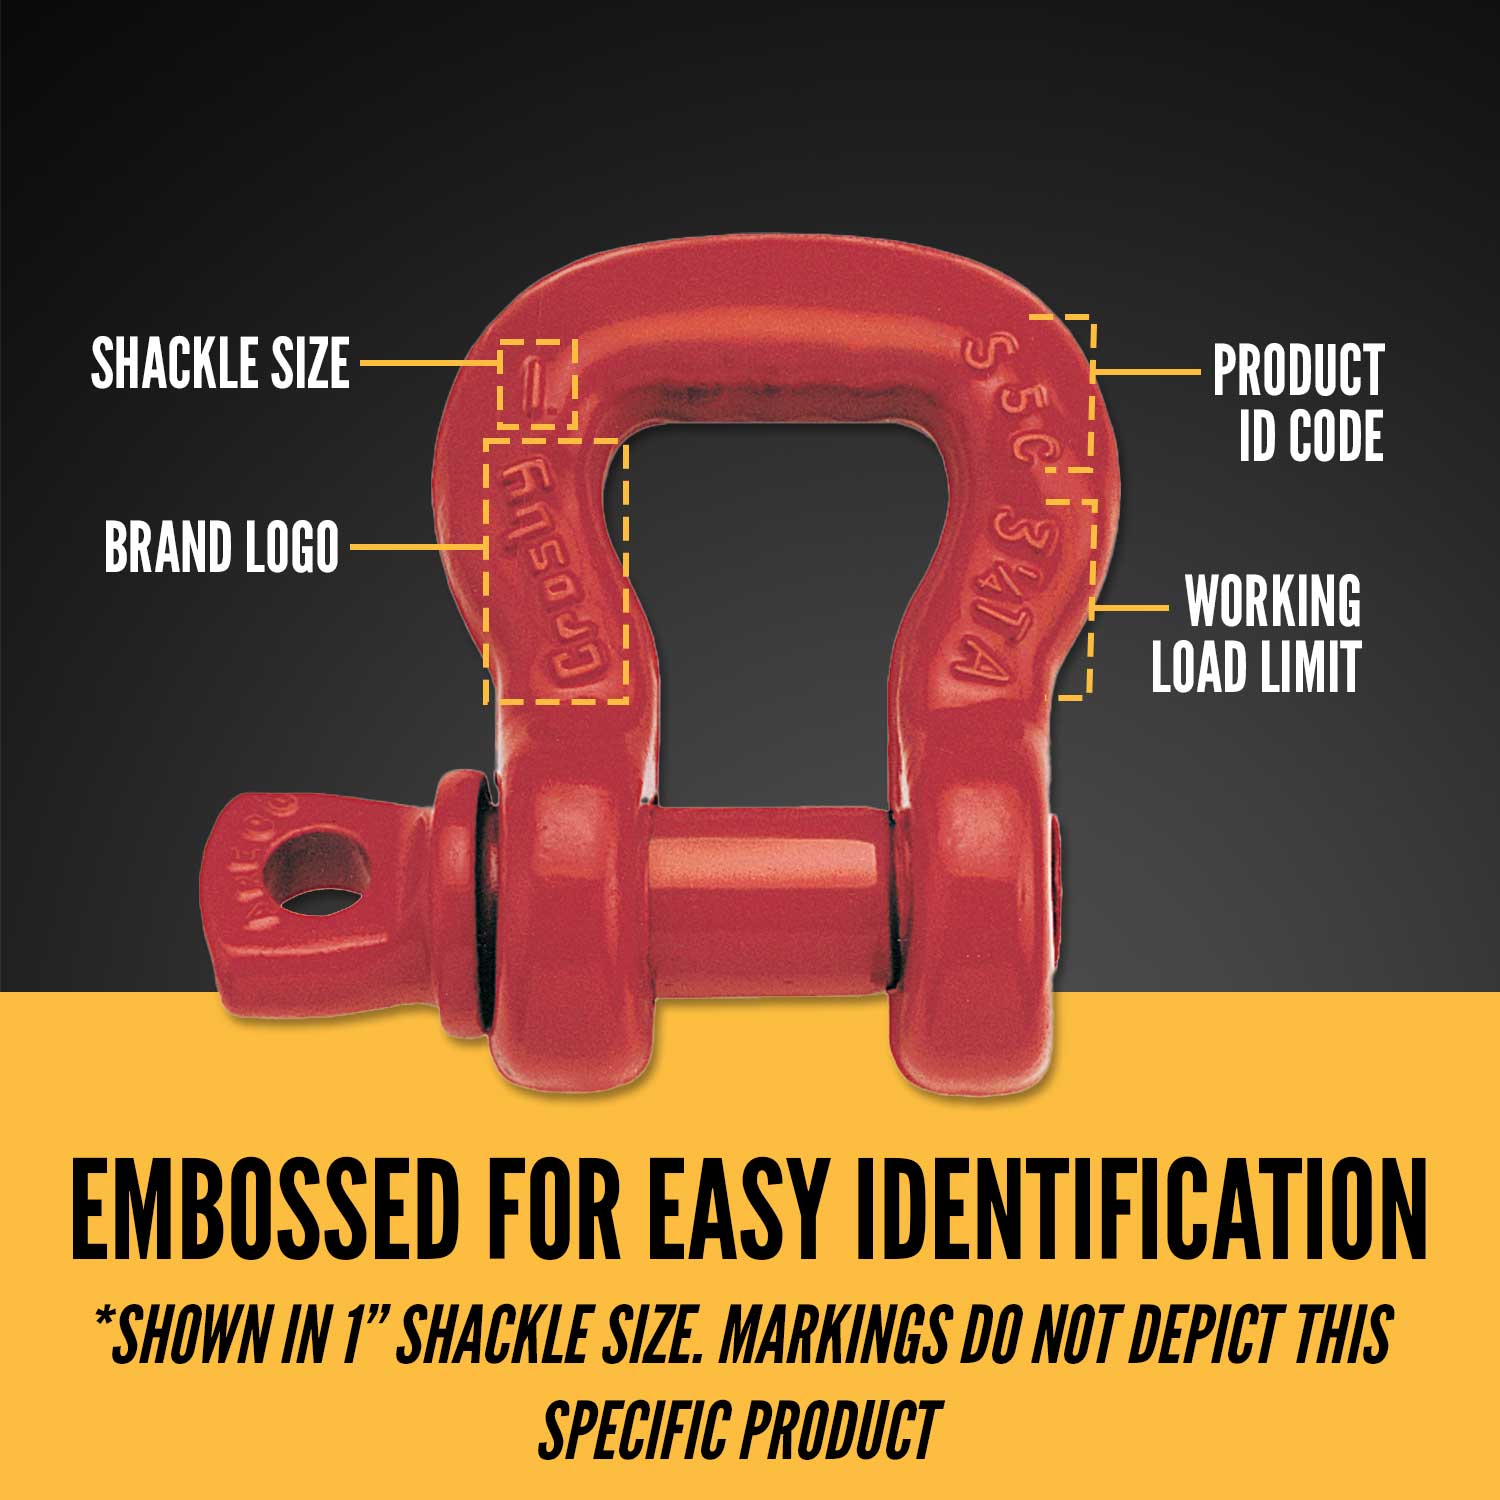 Crosby® Screw Pin Sling Saver Shackle | S-253 - 6"- 50 Ton embossed for easy identification